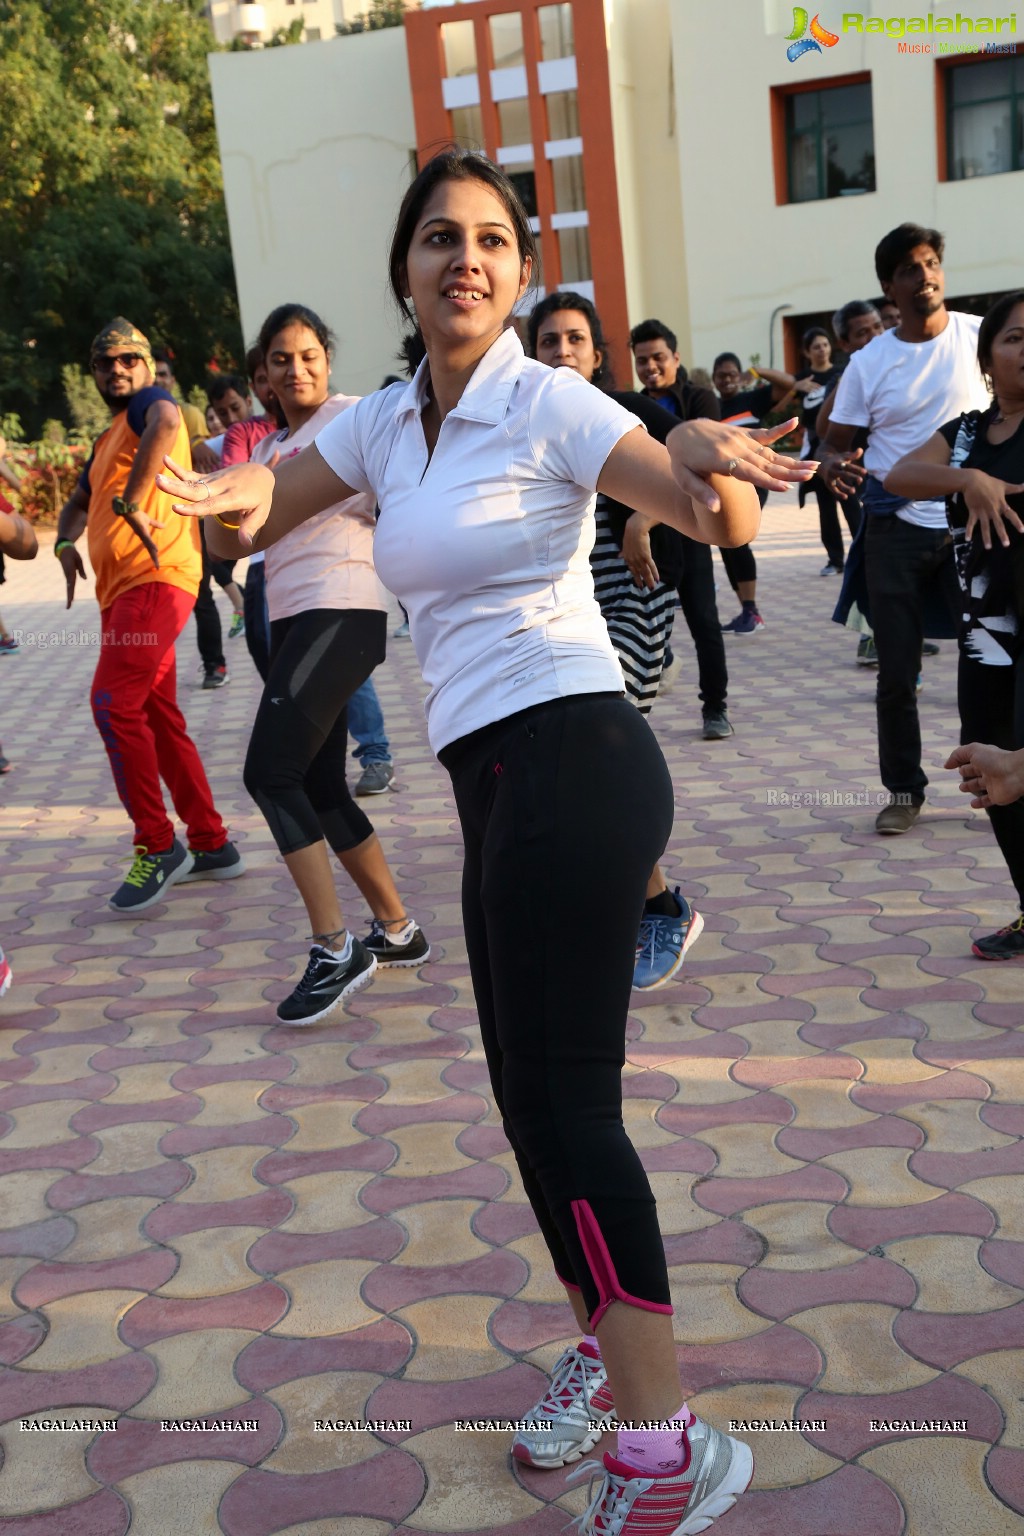 Dance Fitness Festival by Bobby Fitness Fusion & VENTZ at NITHM